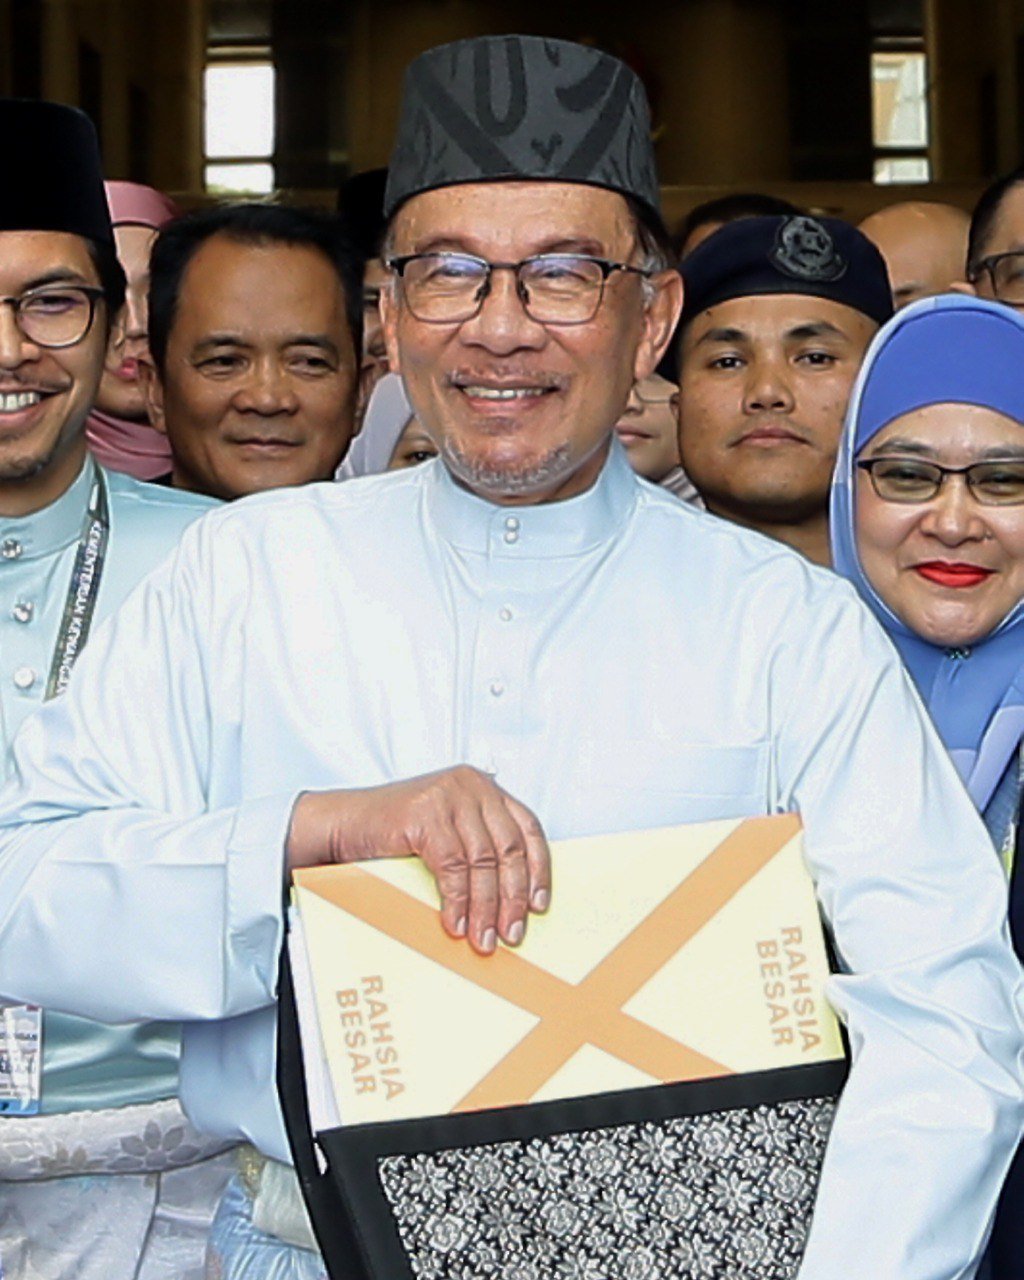 Prime Minister Datuk Seri Anwar Ibrahim poses with the the revised Budget 2023 book before heading to the parliament. - NSTP/MOHD FADLI HAMZAH